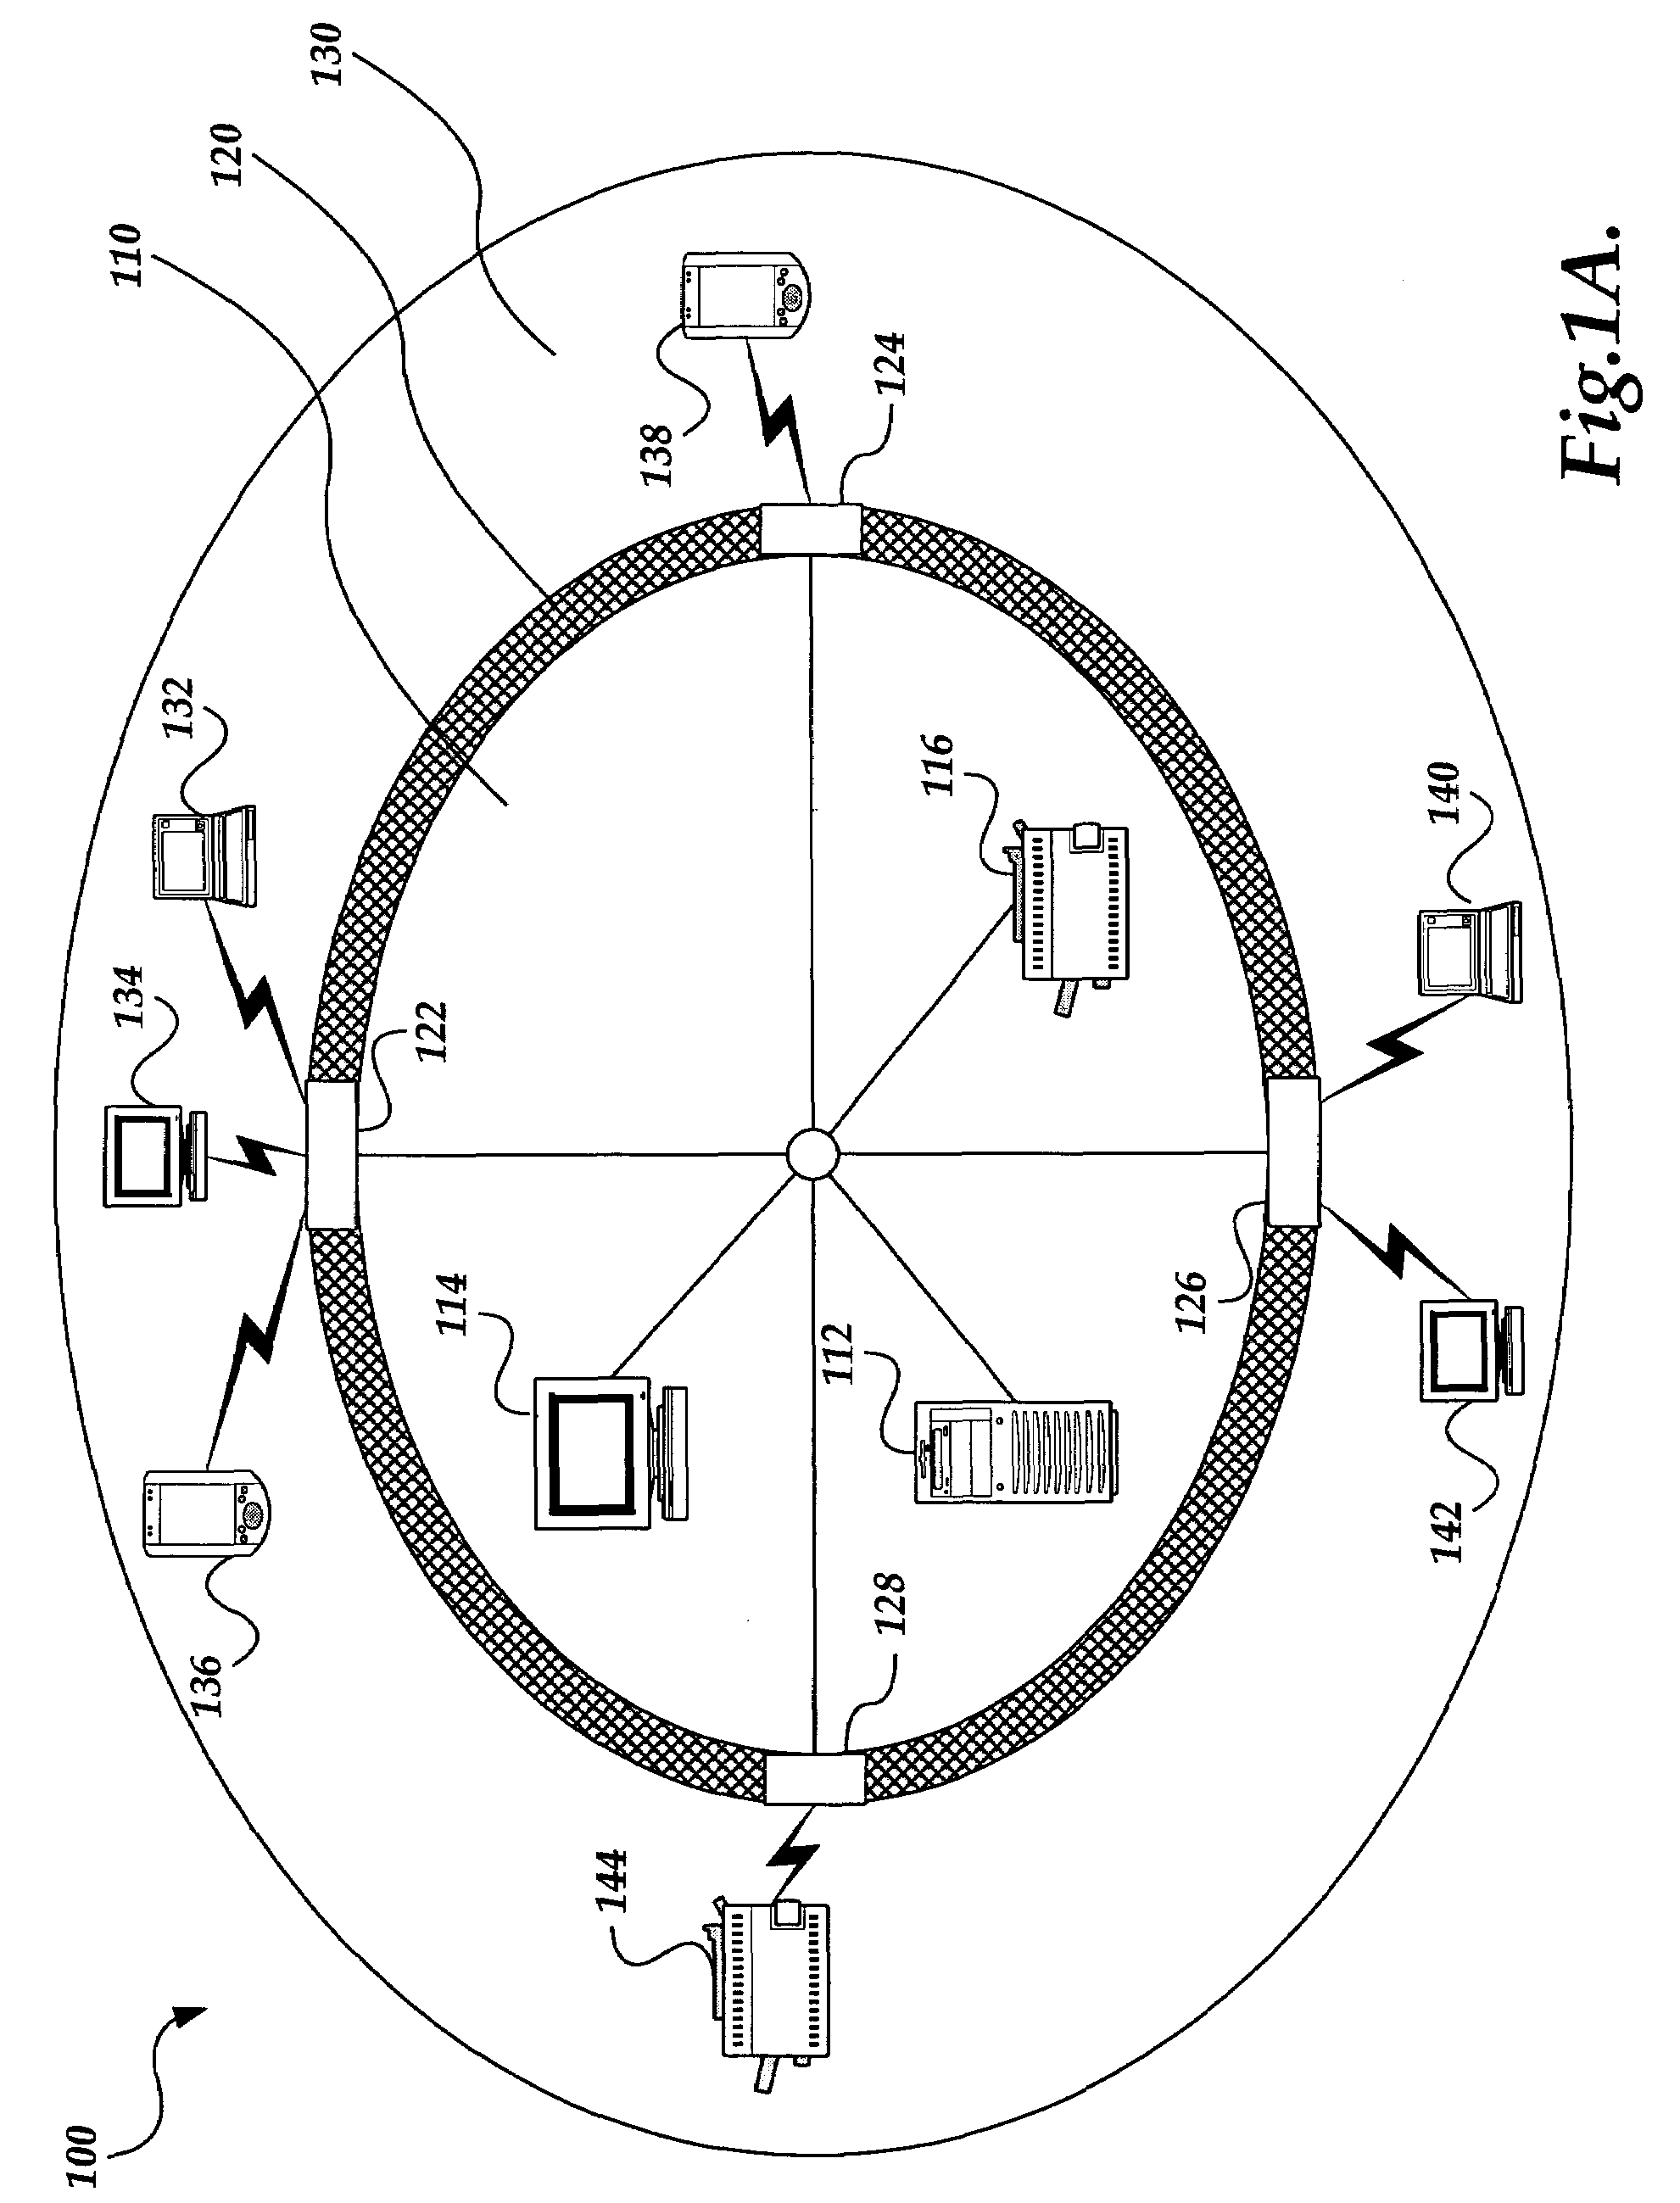 System and method for wireless local area network monitoring and intrusion detection